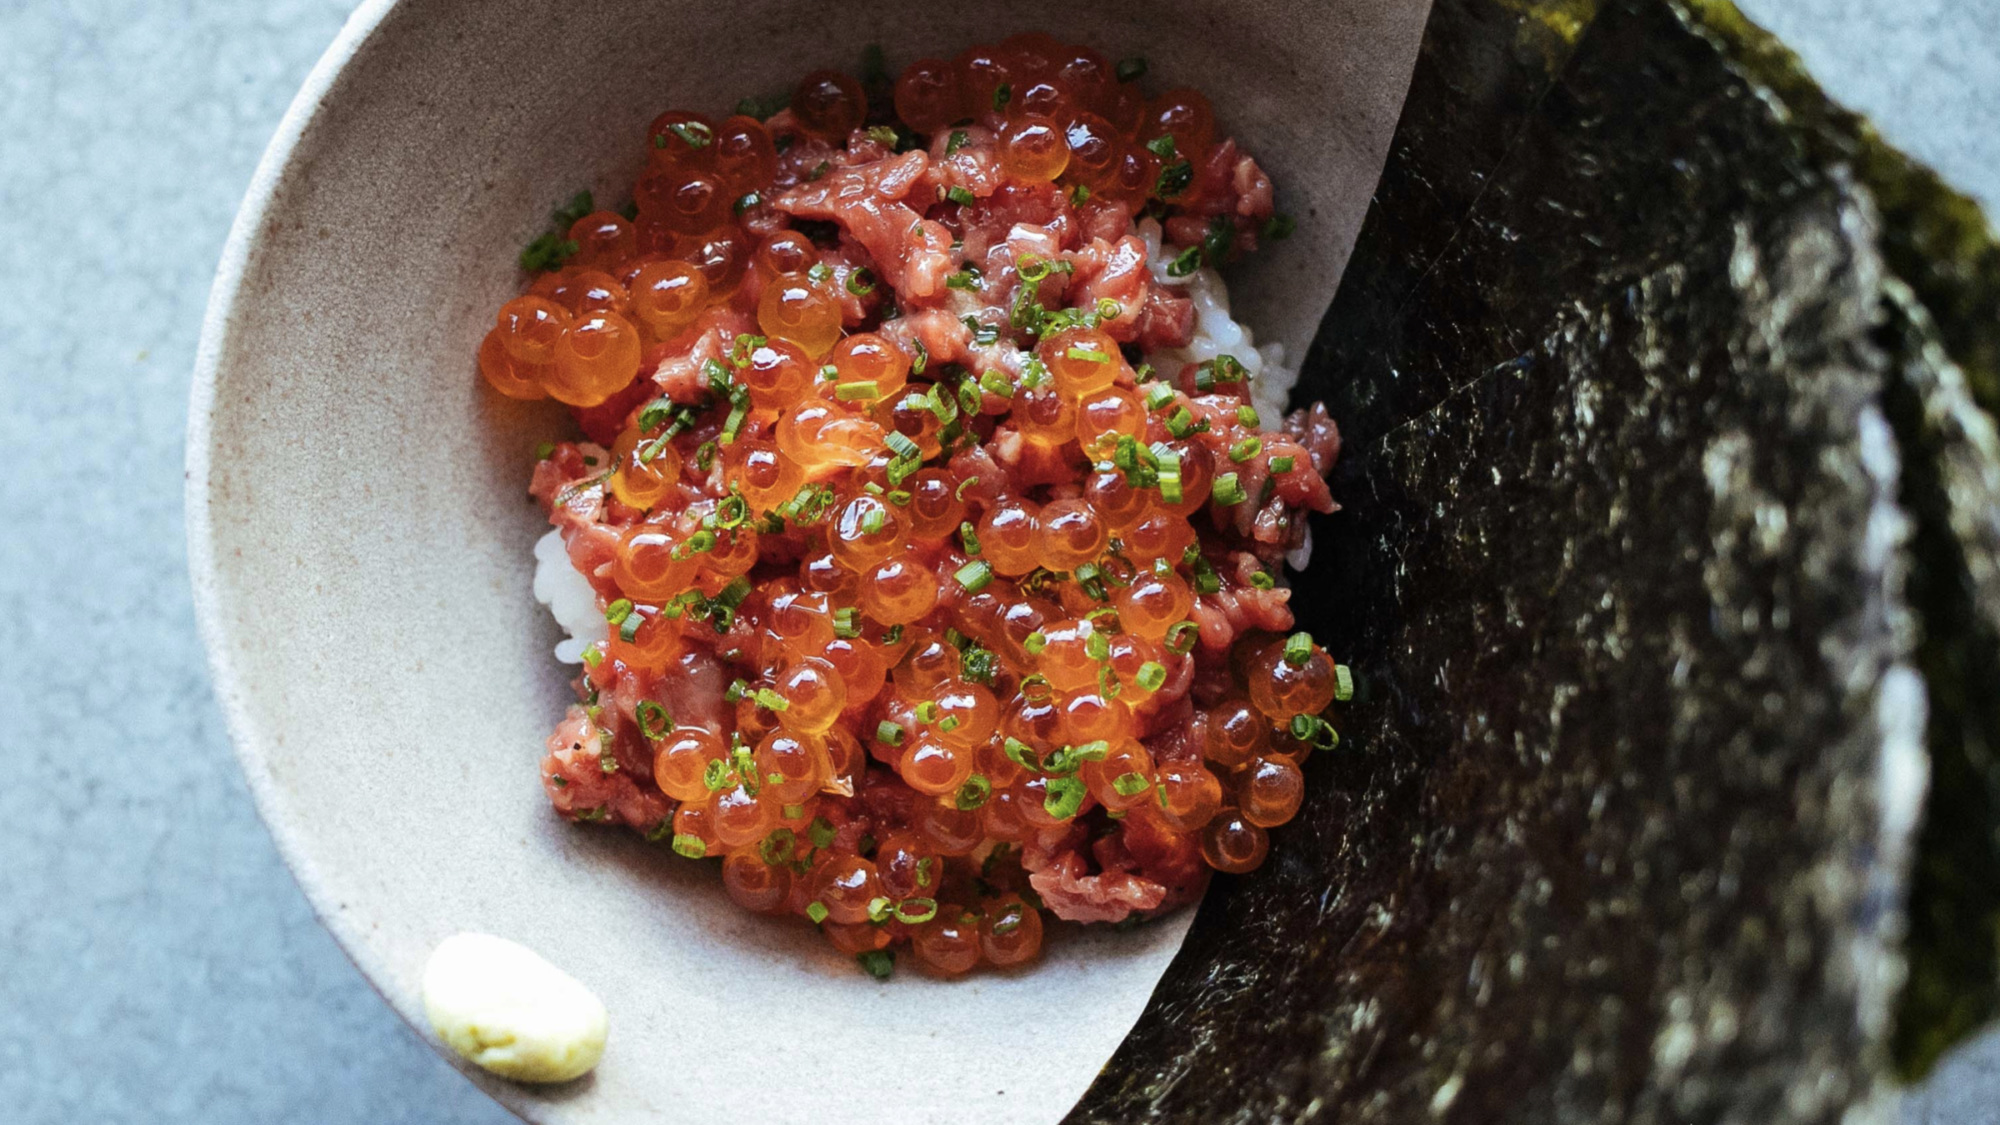 Ernest's beef tartare with sushi rice, ikura, and toasted nori.